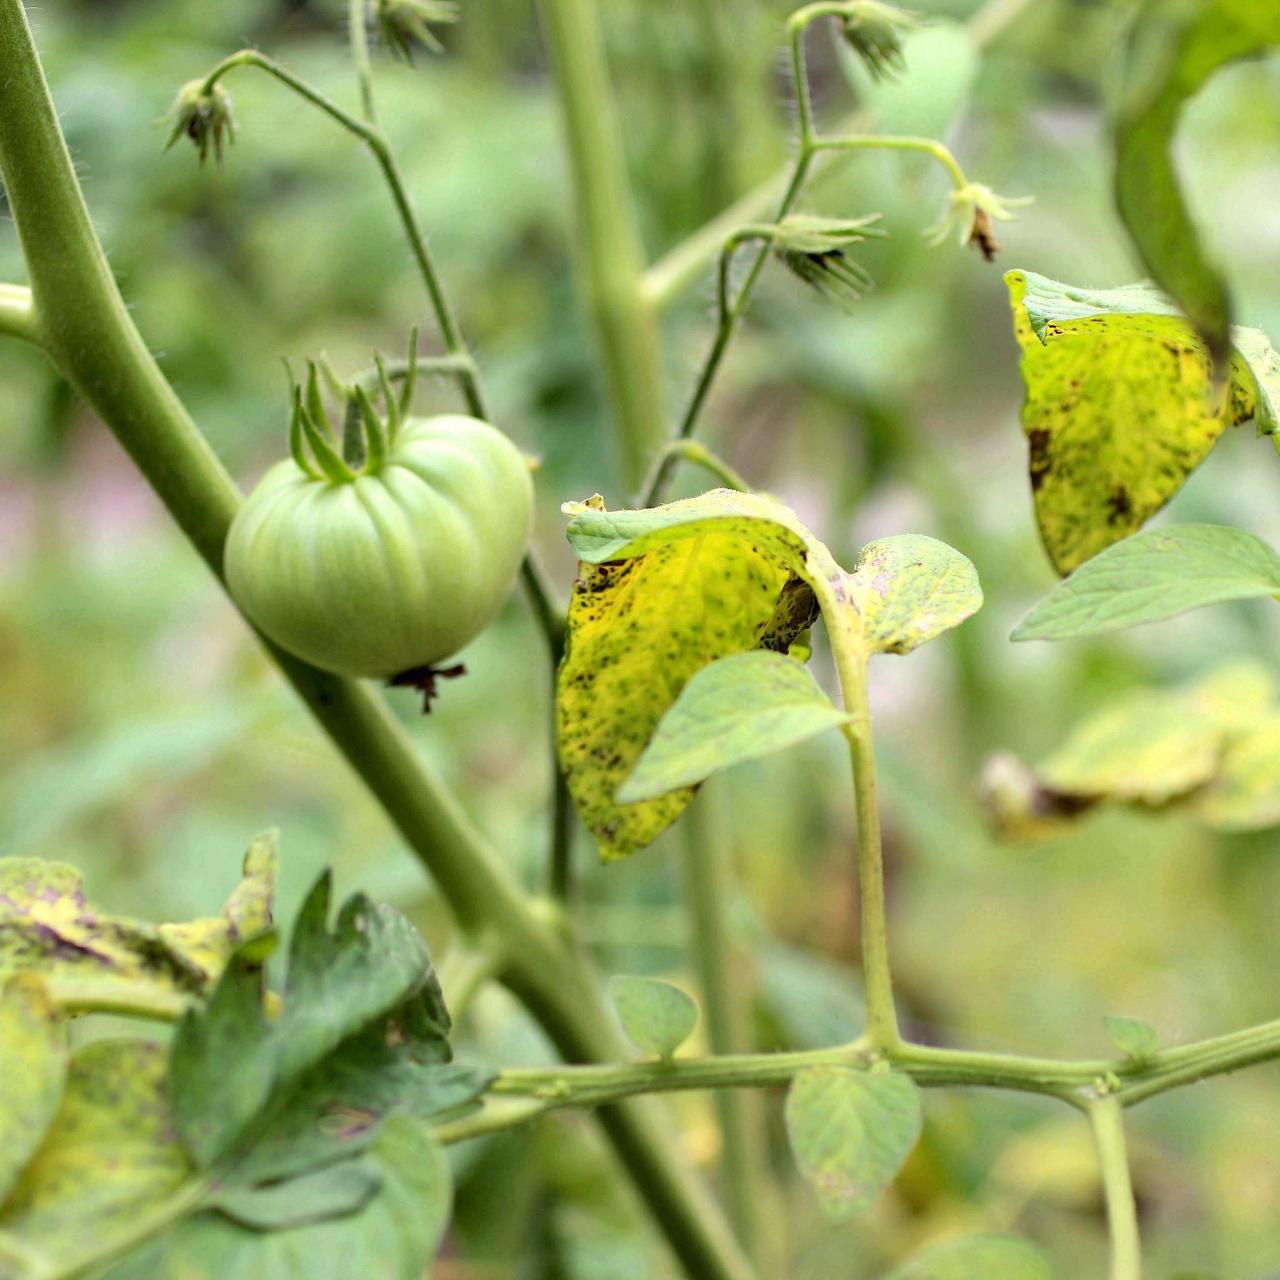 Revealed: What To Do With Tomato Plants At End Of Season